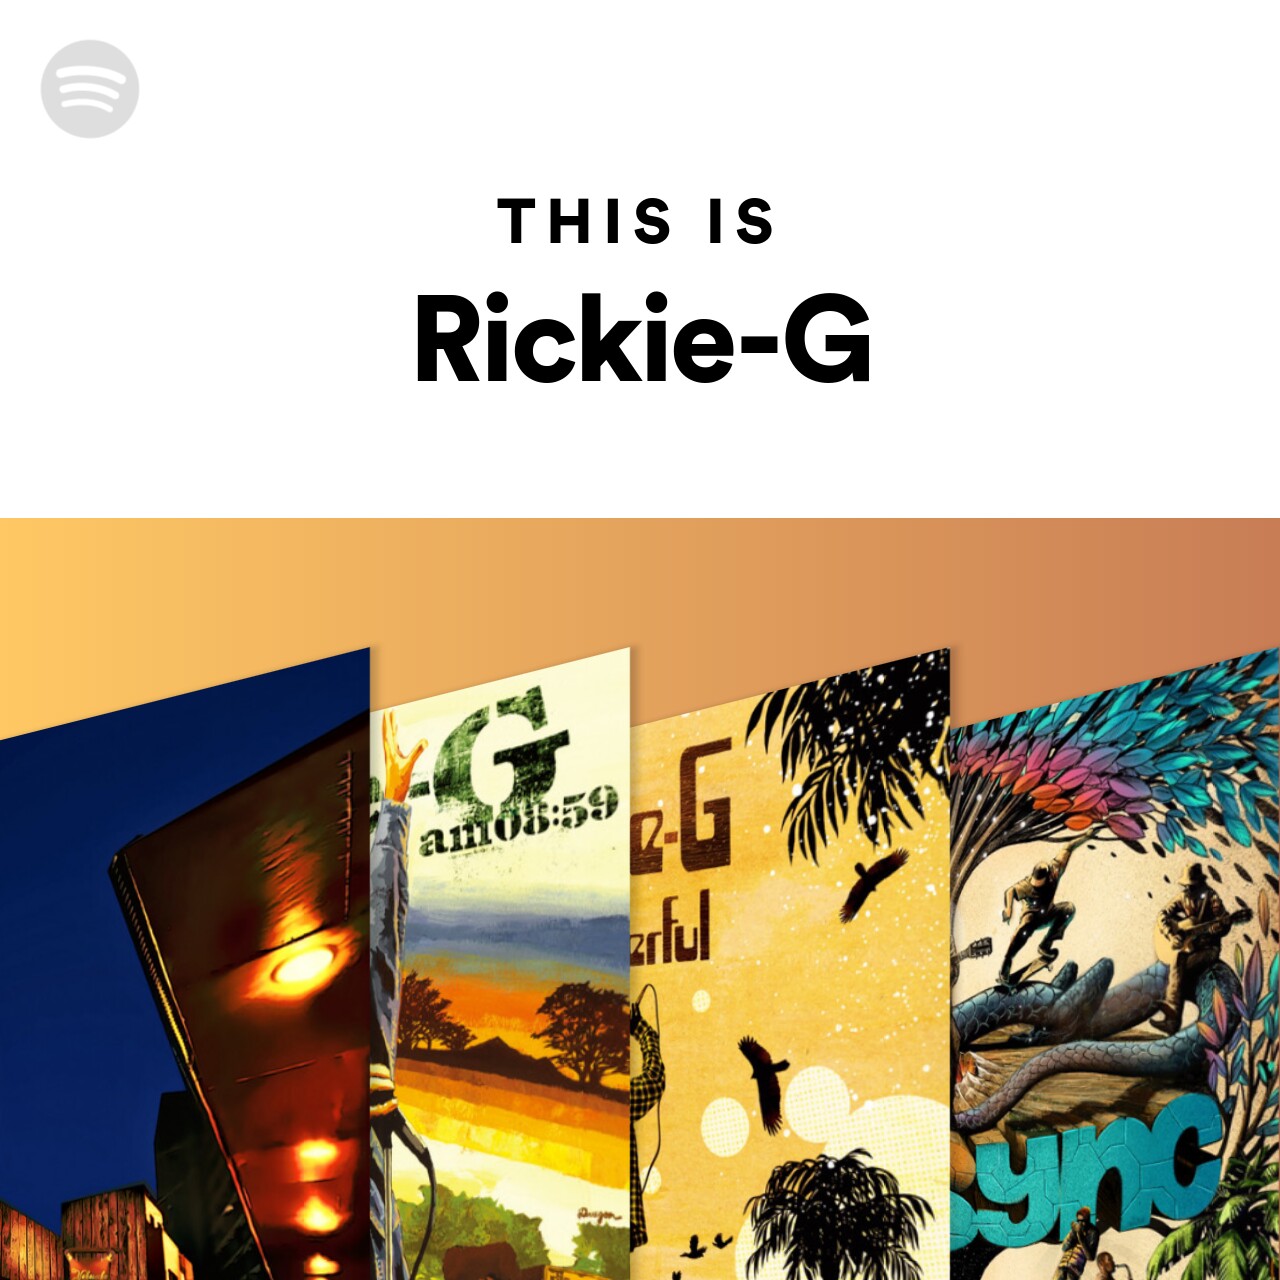 This Is Rickie-G